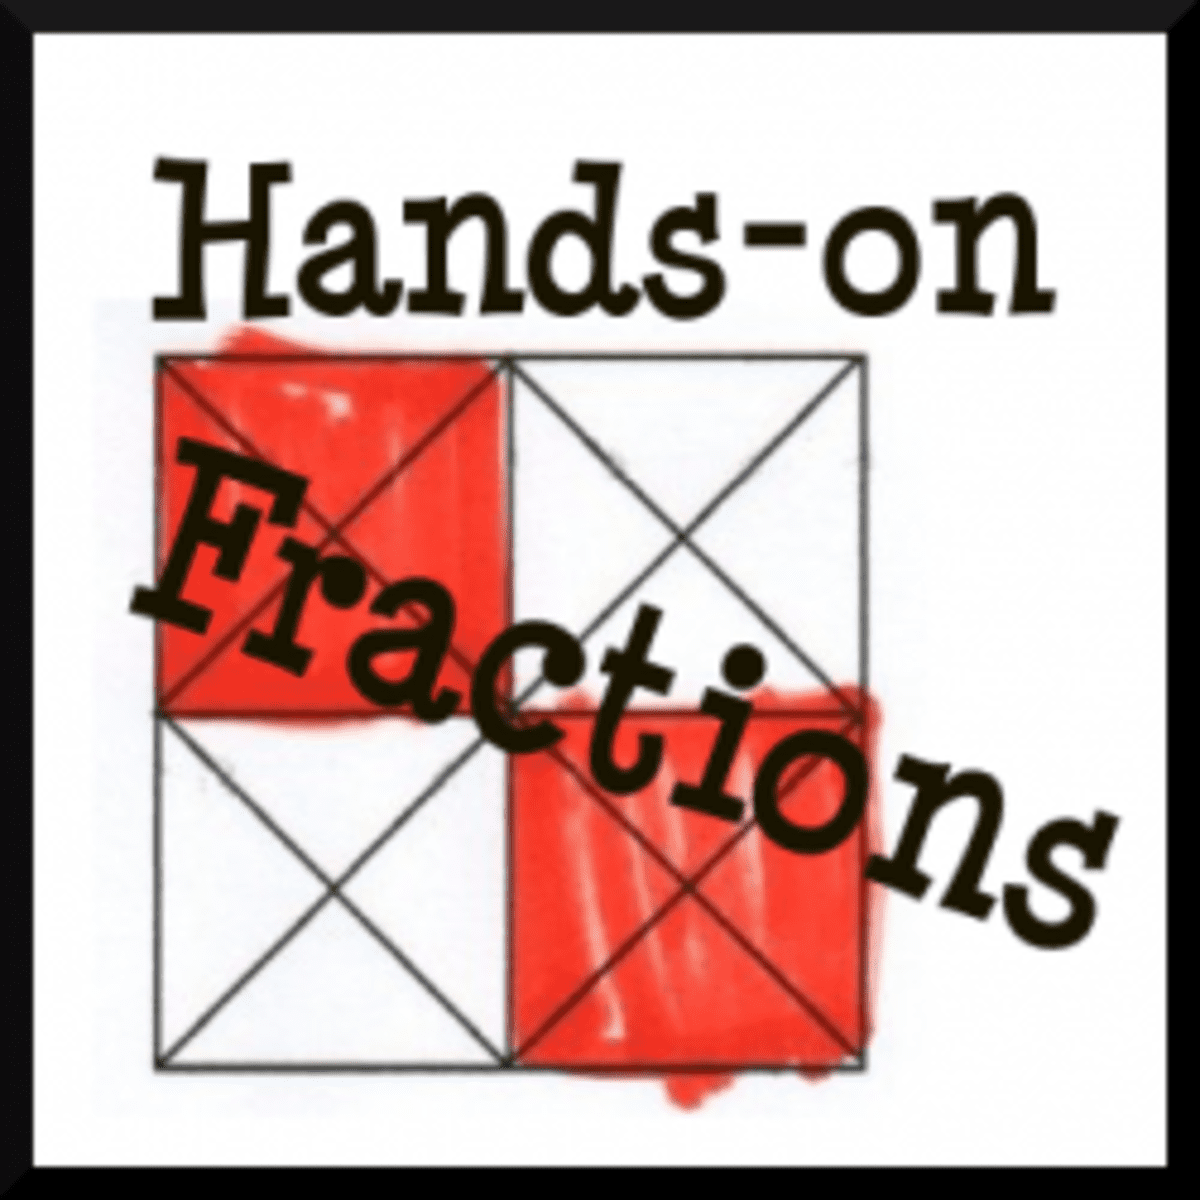 how to create a file folder fraction game